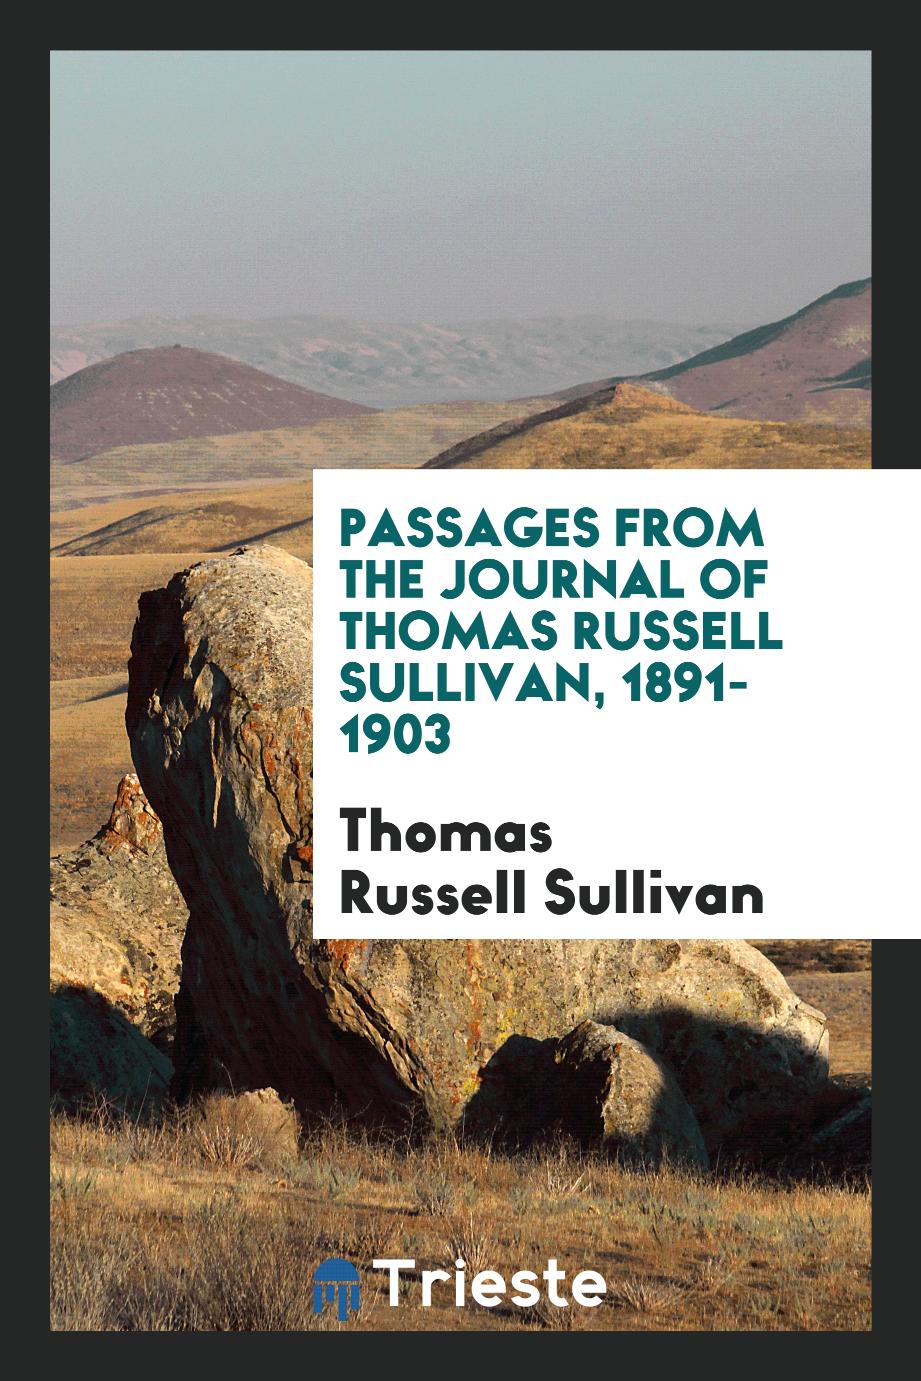 Passages from the journal of Thomas Russell Sullivan, 1891-1903